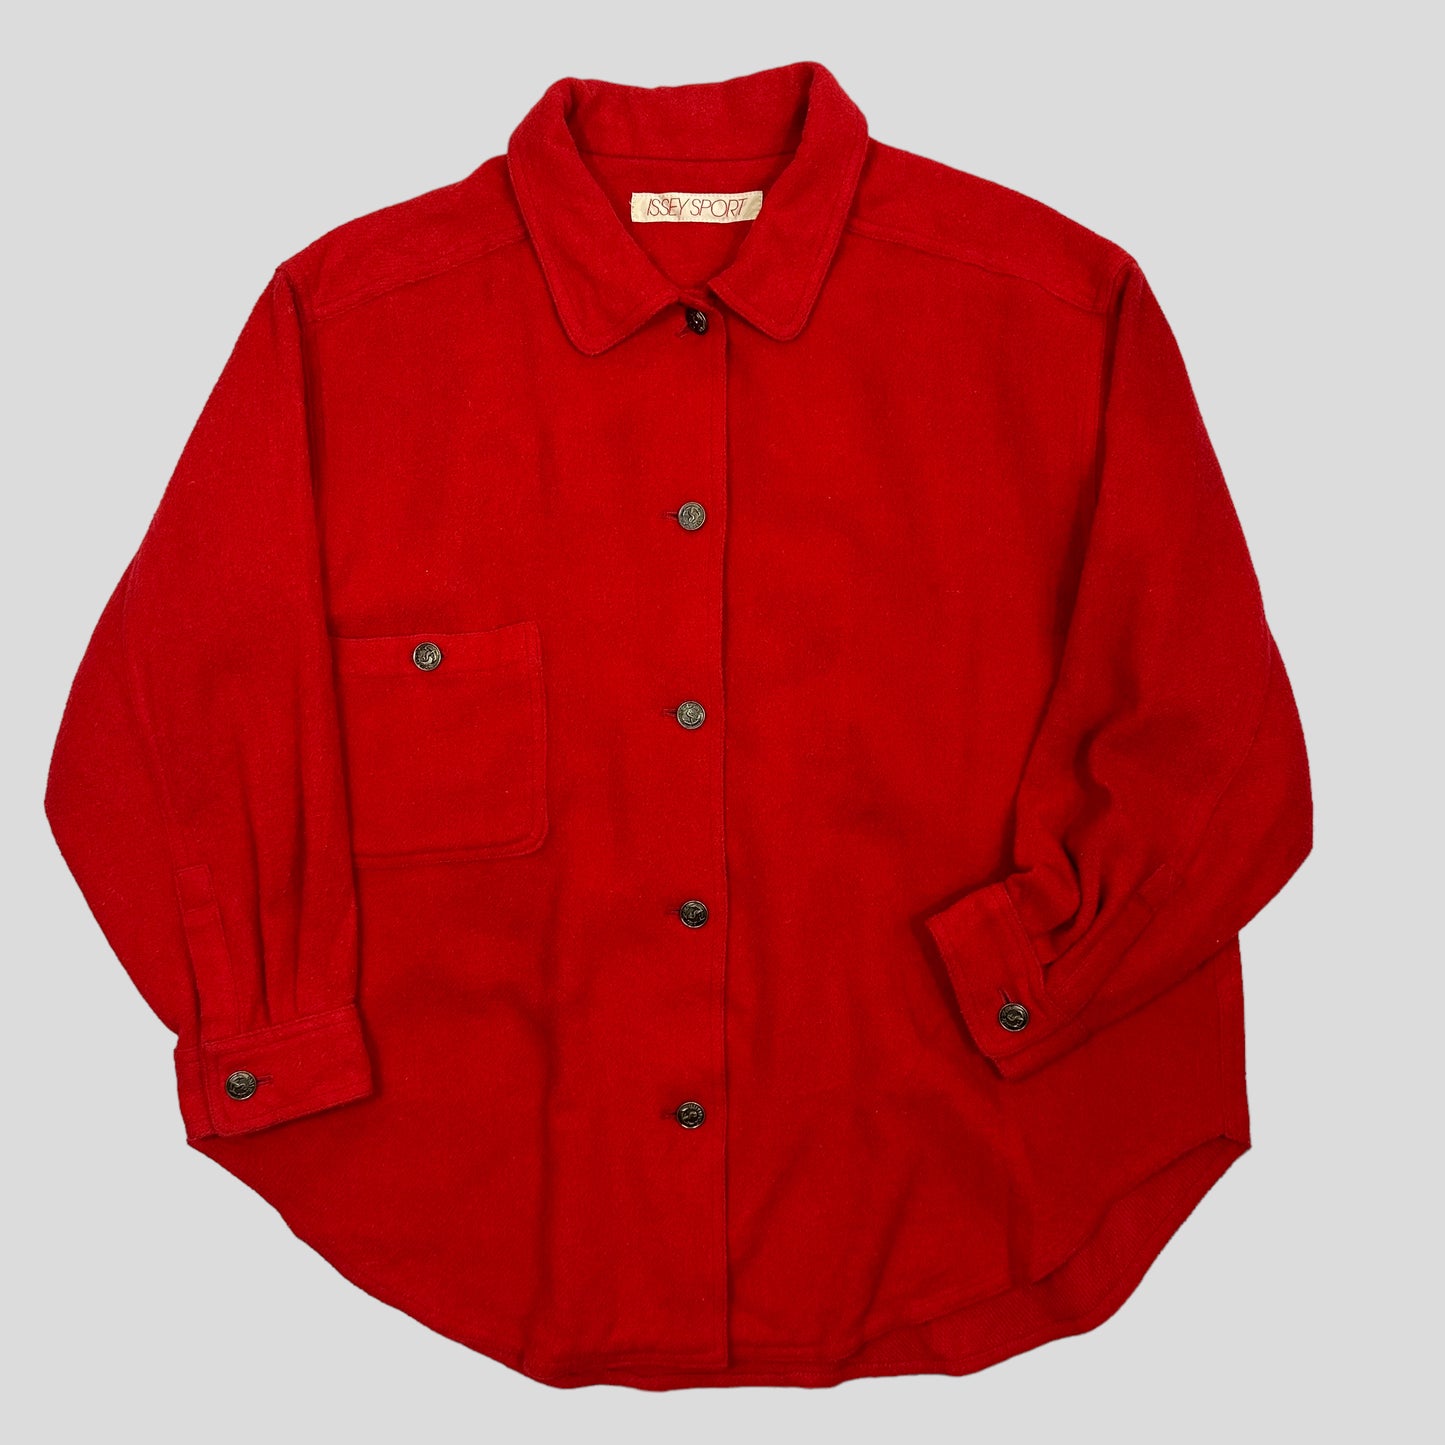 Issey Sport 70’s Heavy Wool Anchor Button Shirt - M/L